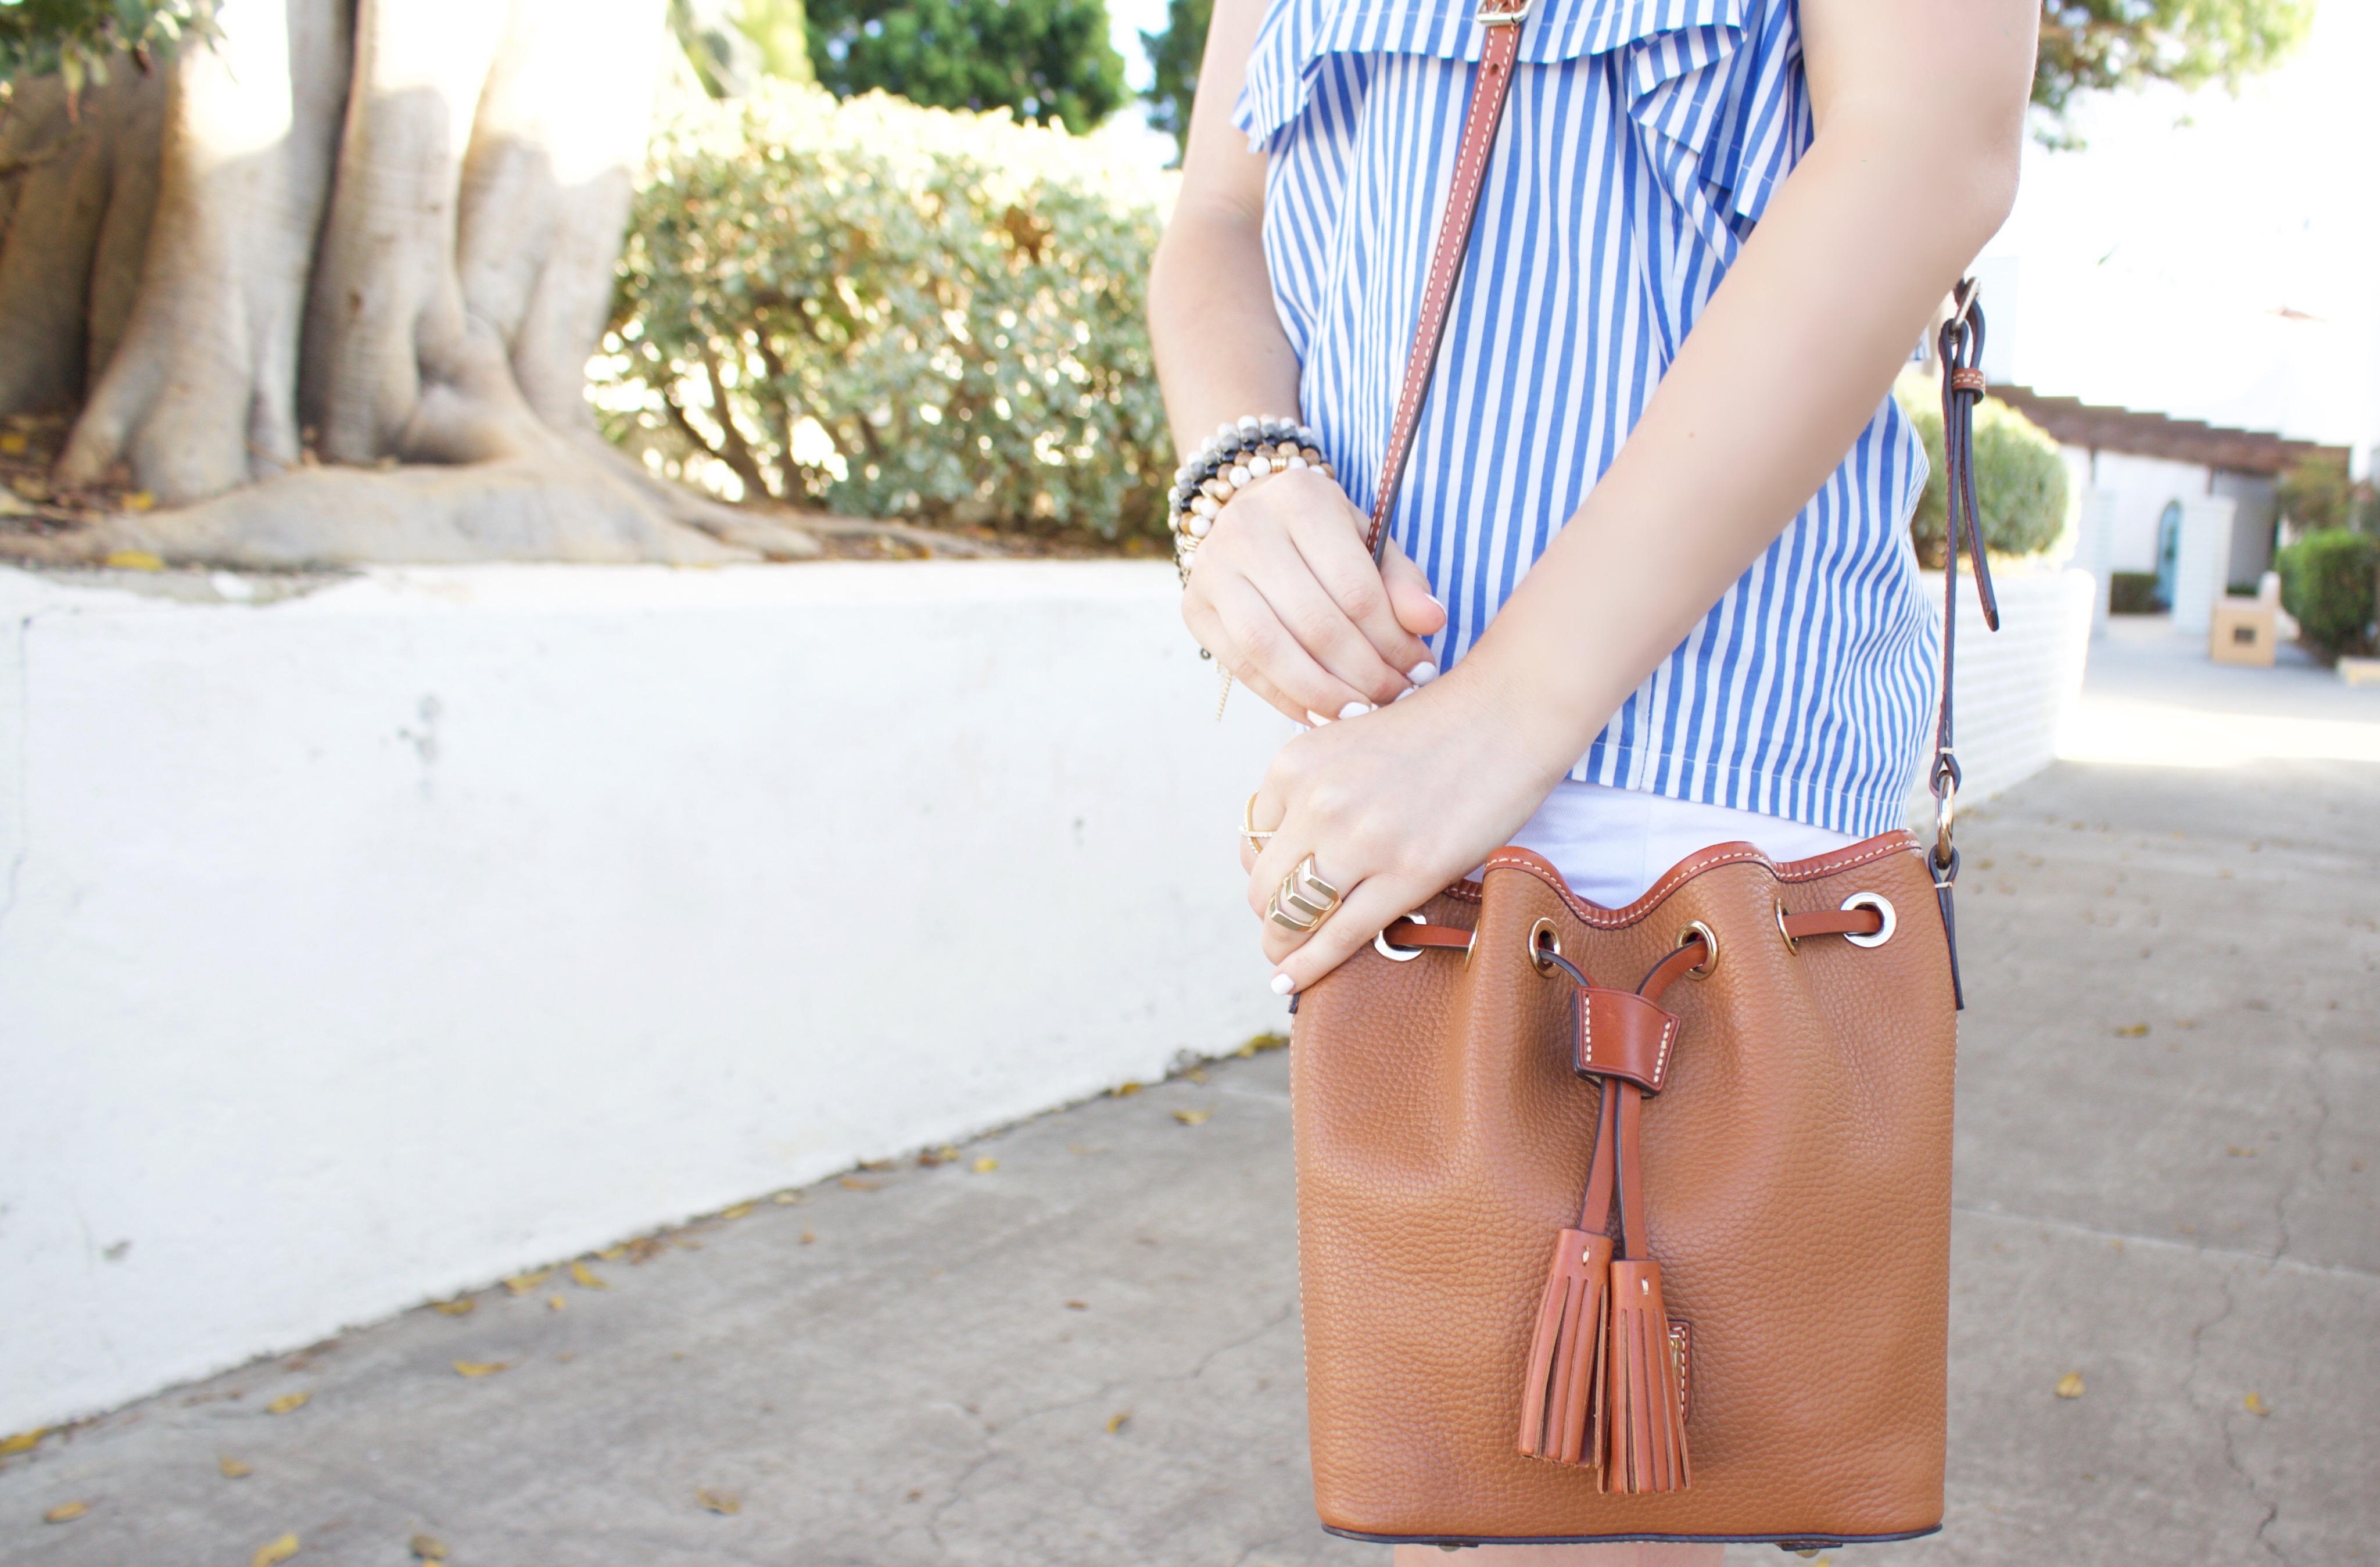 Pebble Kendall Crossbody - Blue and White Striped Strapless Top - My Styled Life